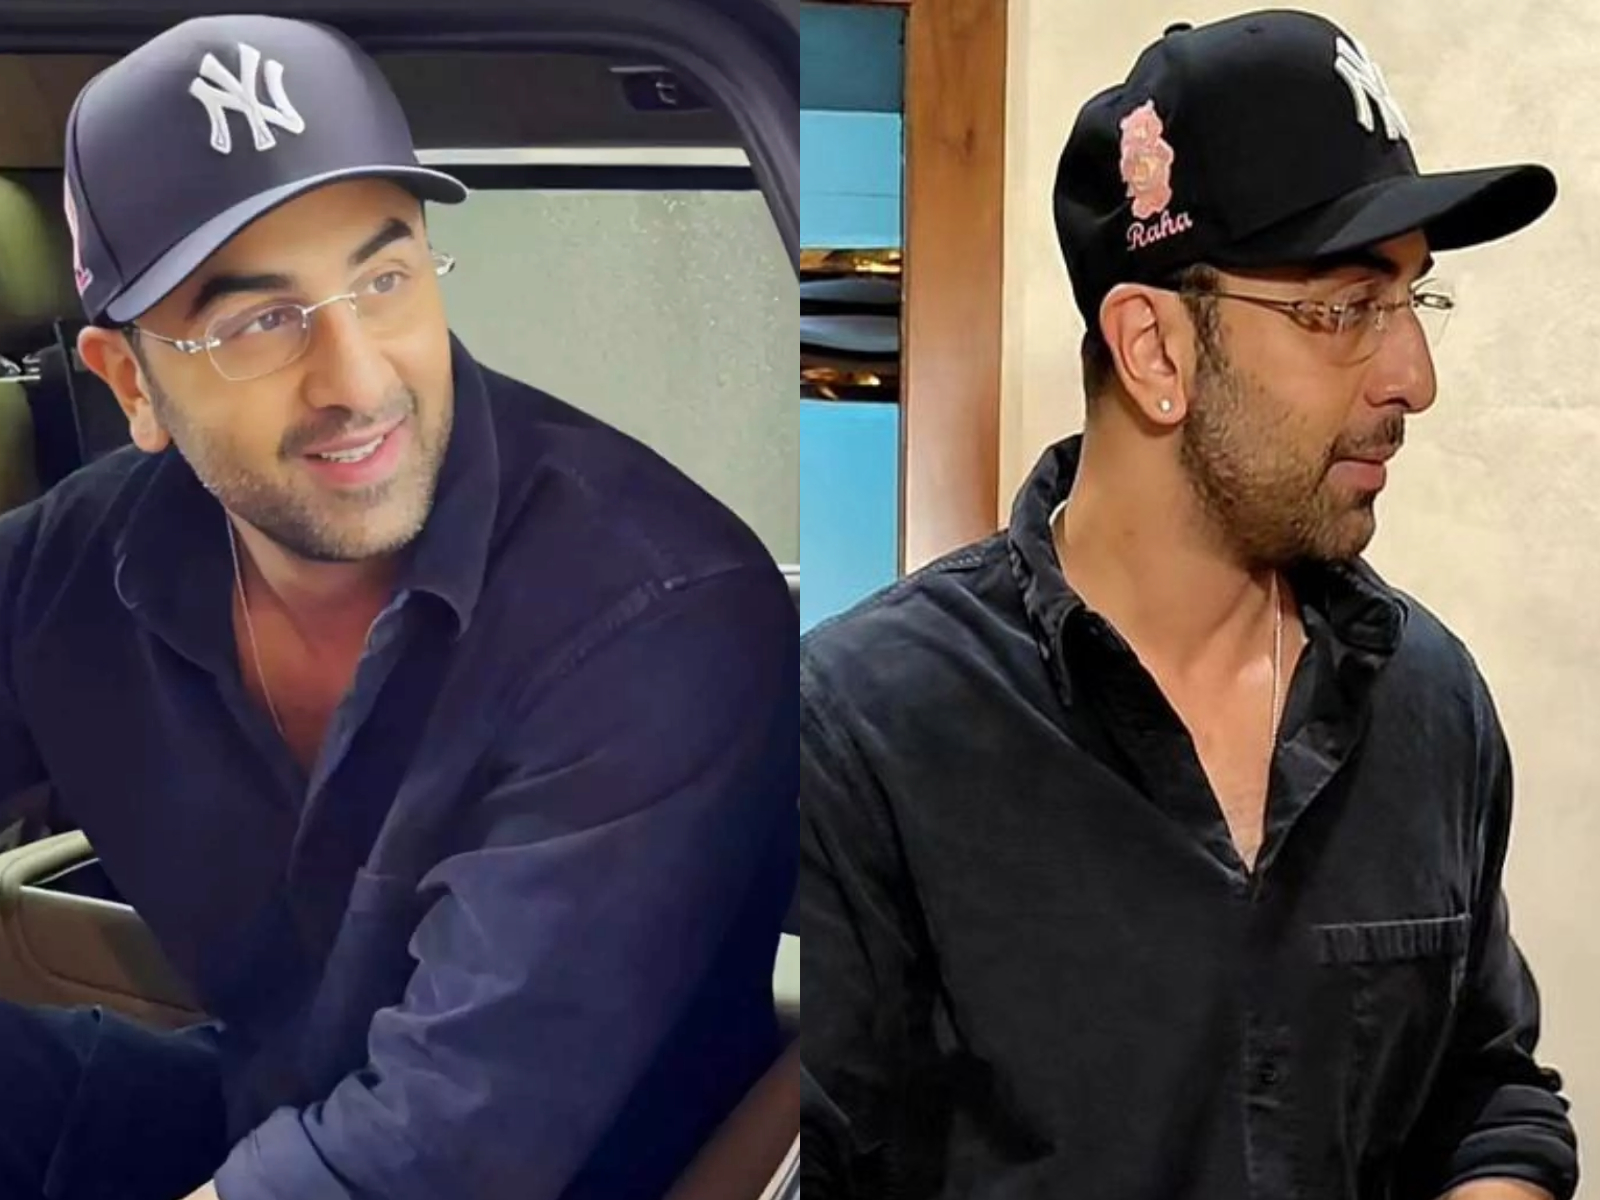 WATCH: New dad Ranbir Kapoor adorably wears a cap with baby Raha's name on  it - Masala